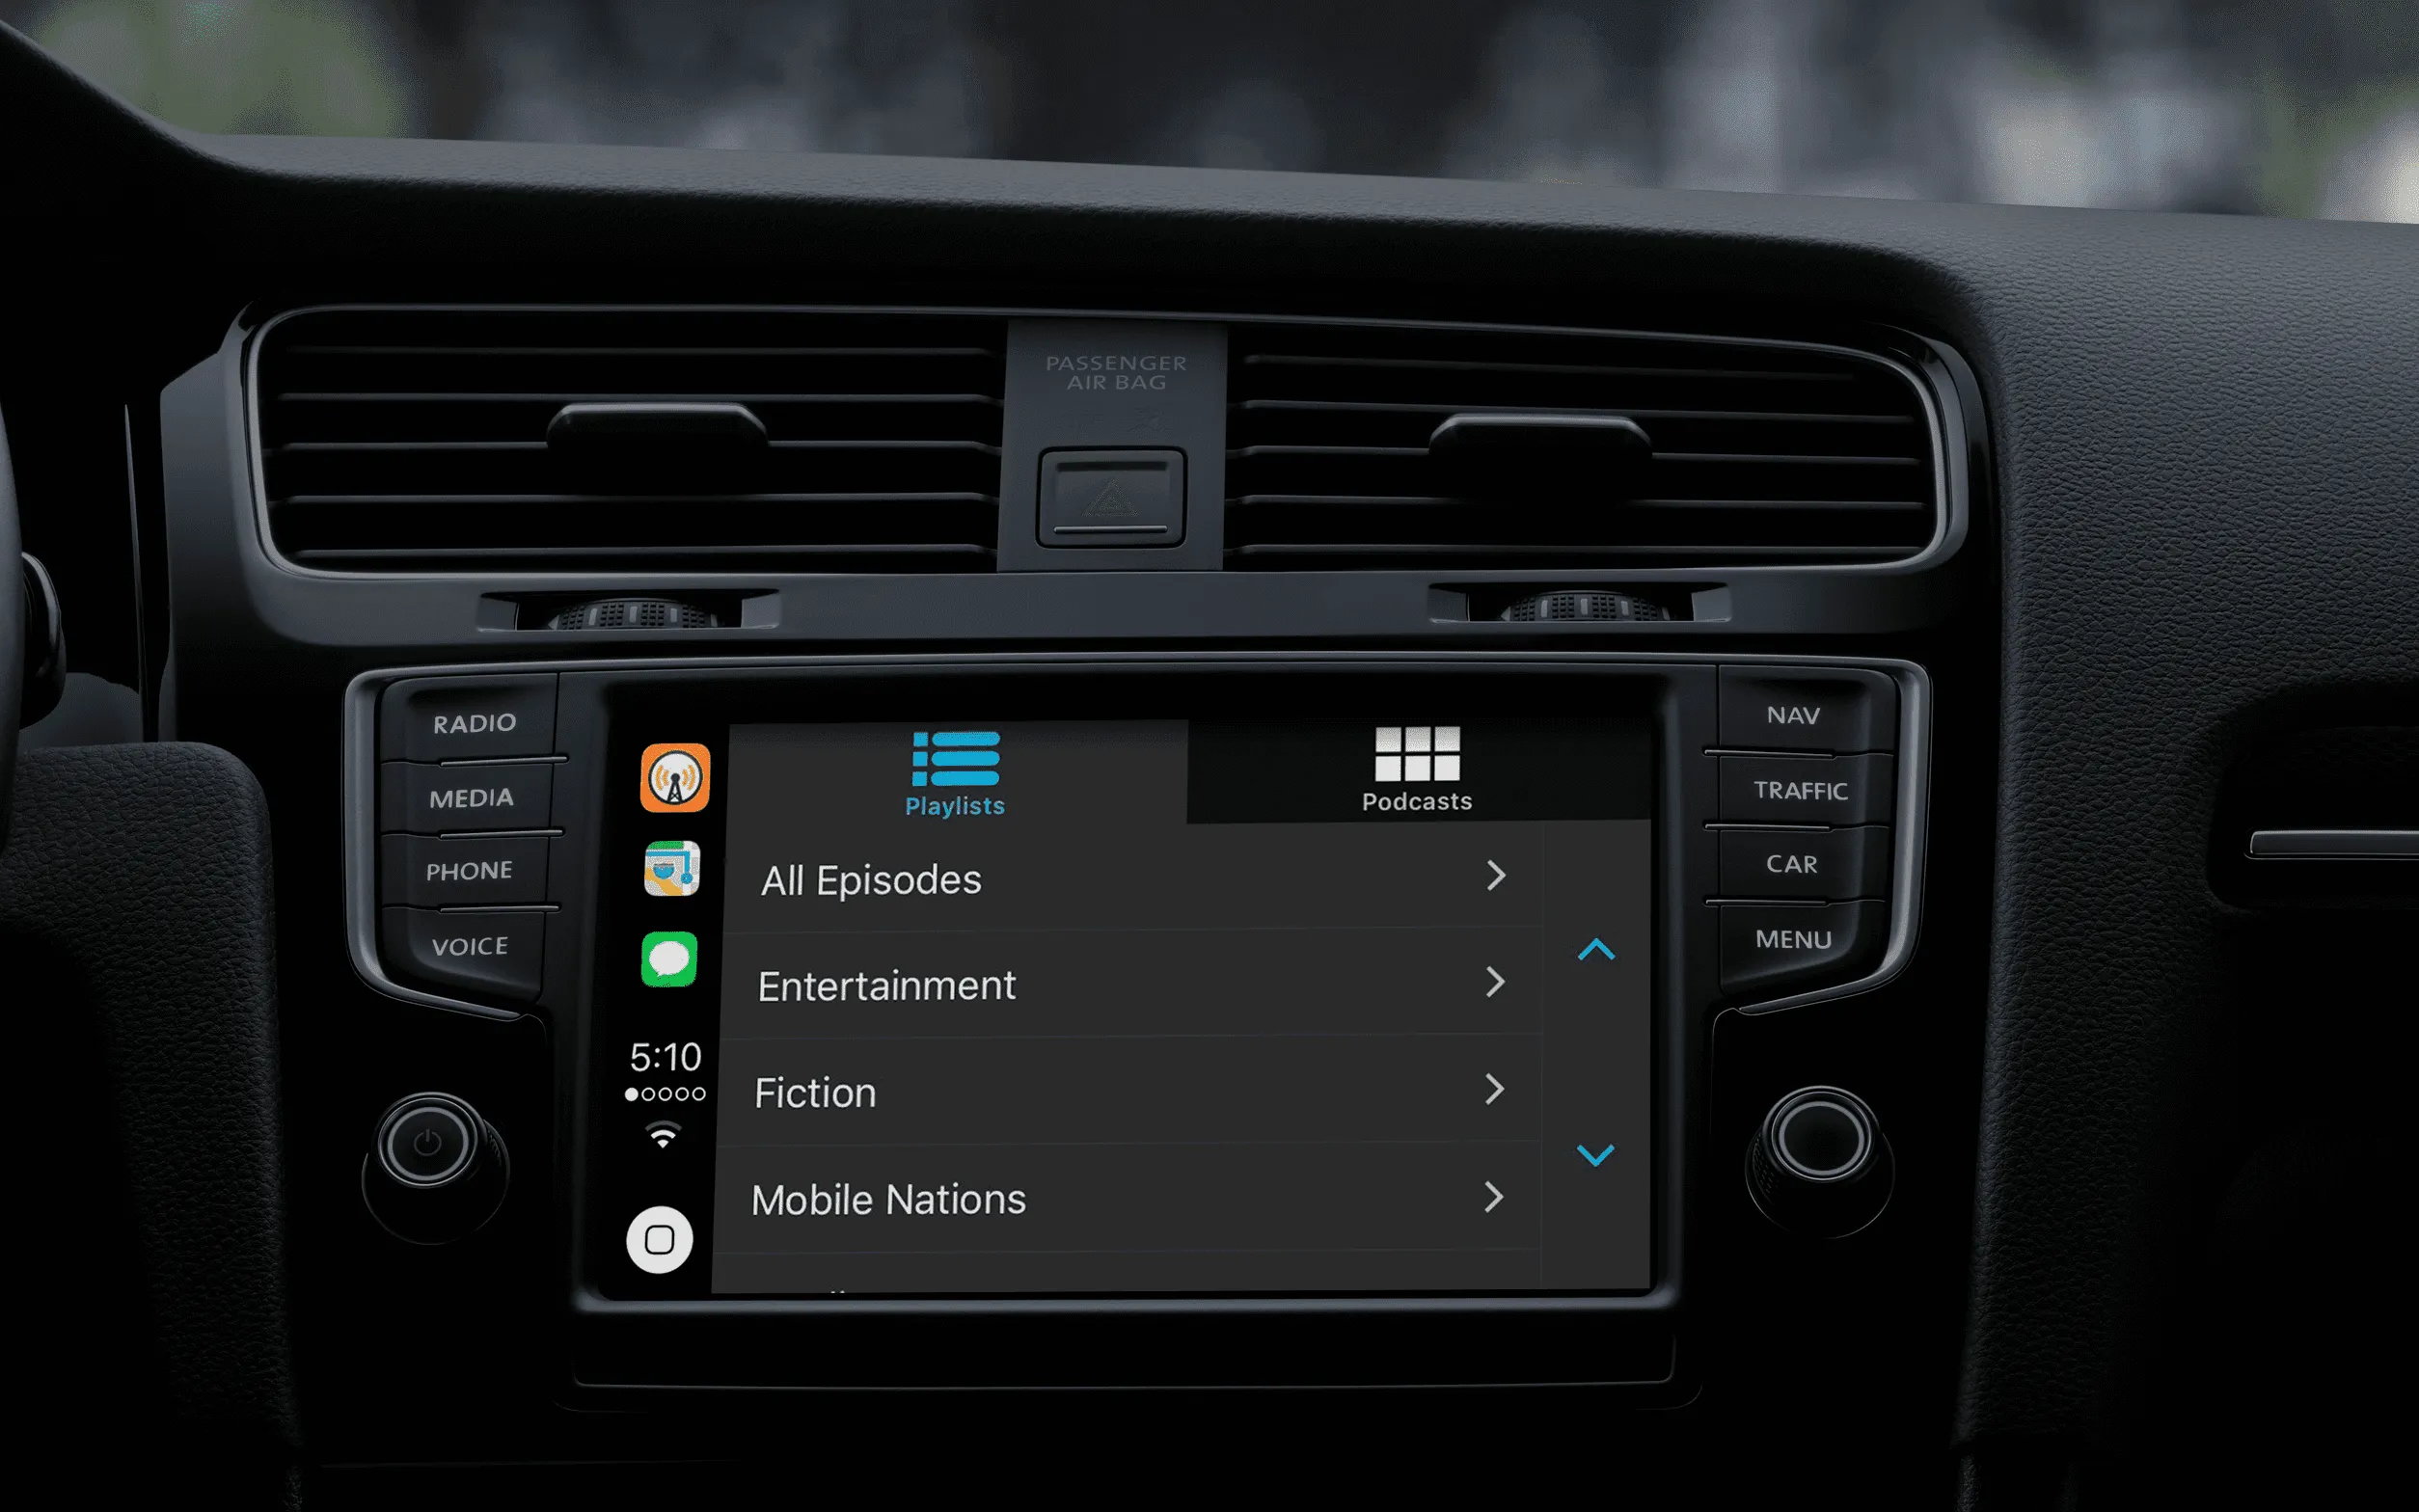 Apps supported by apple CarPlay: Overcast